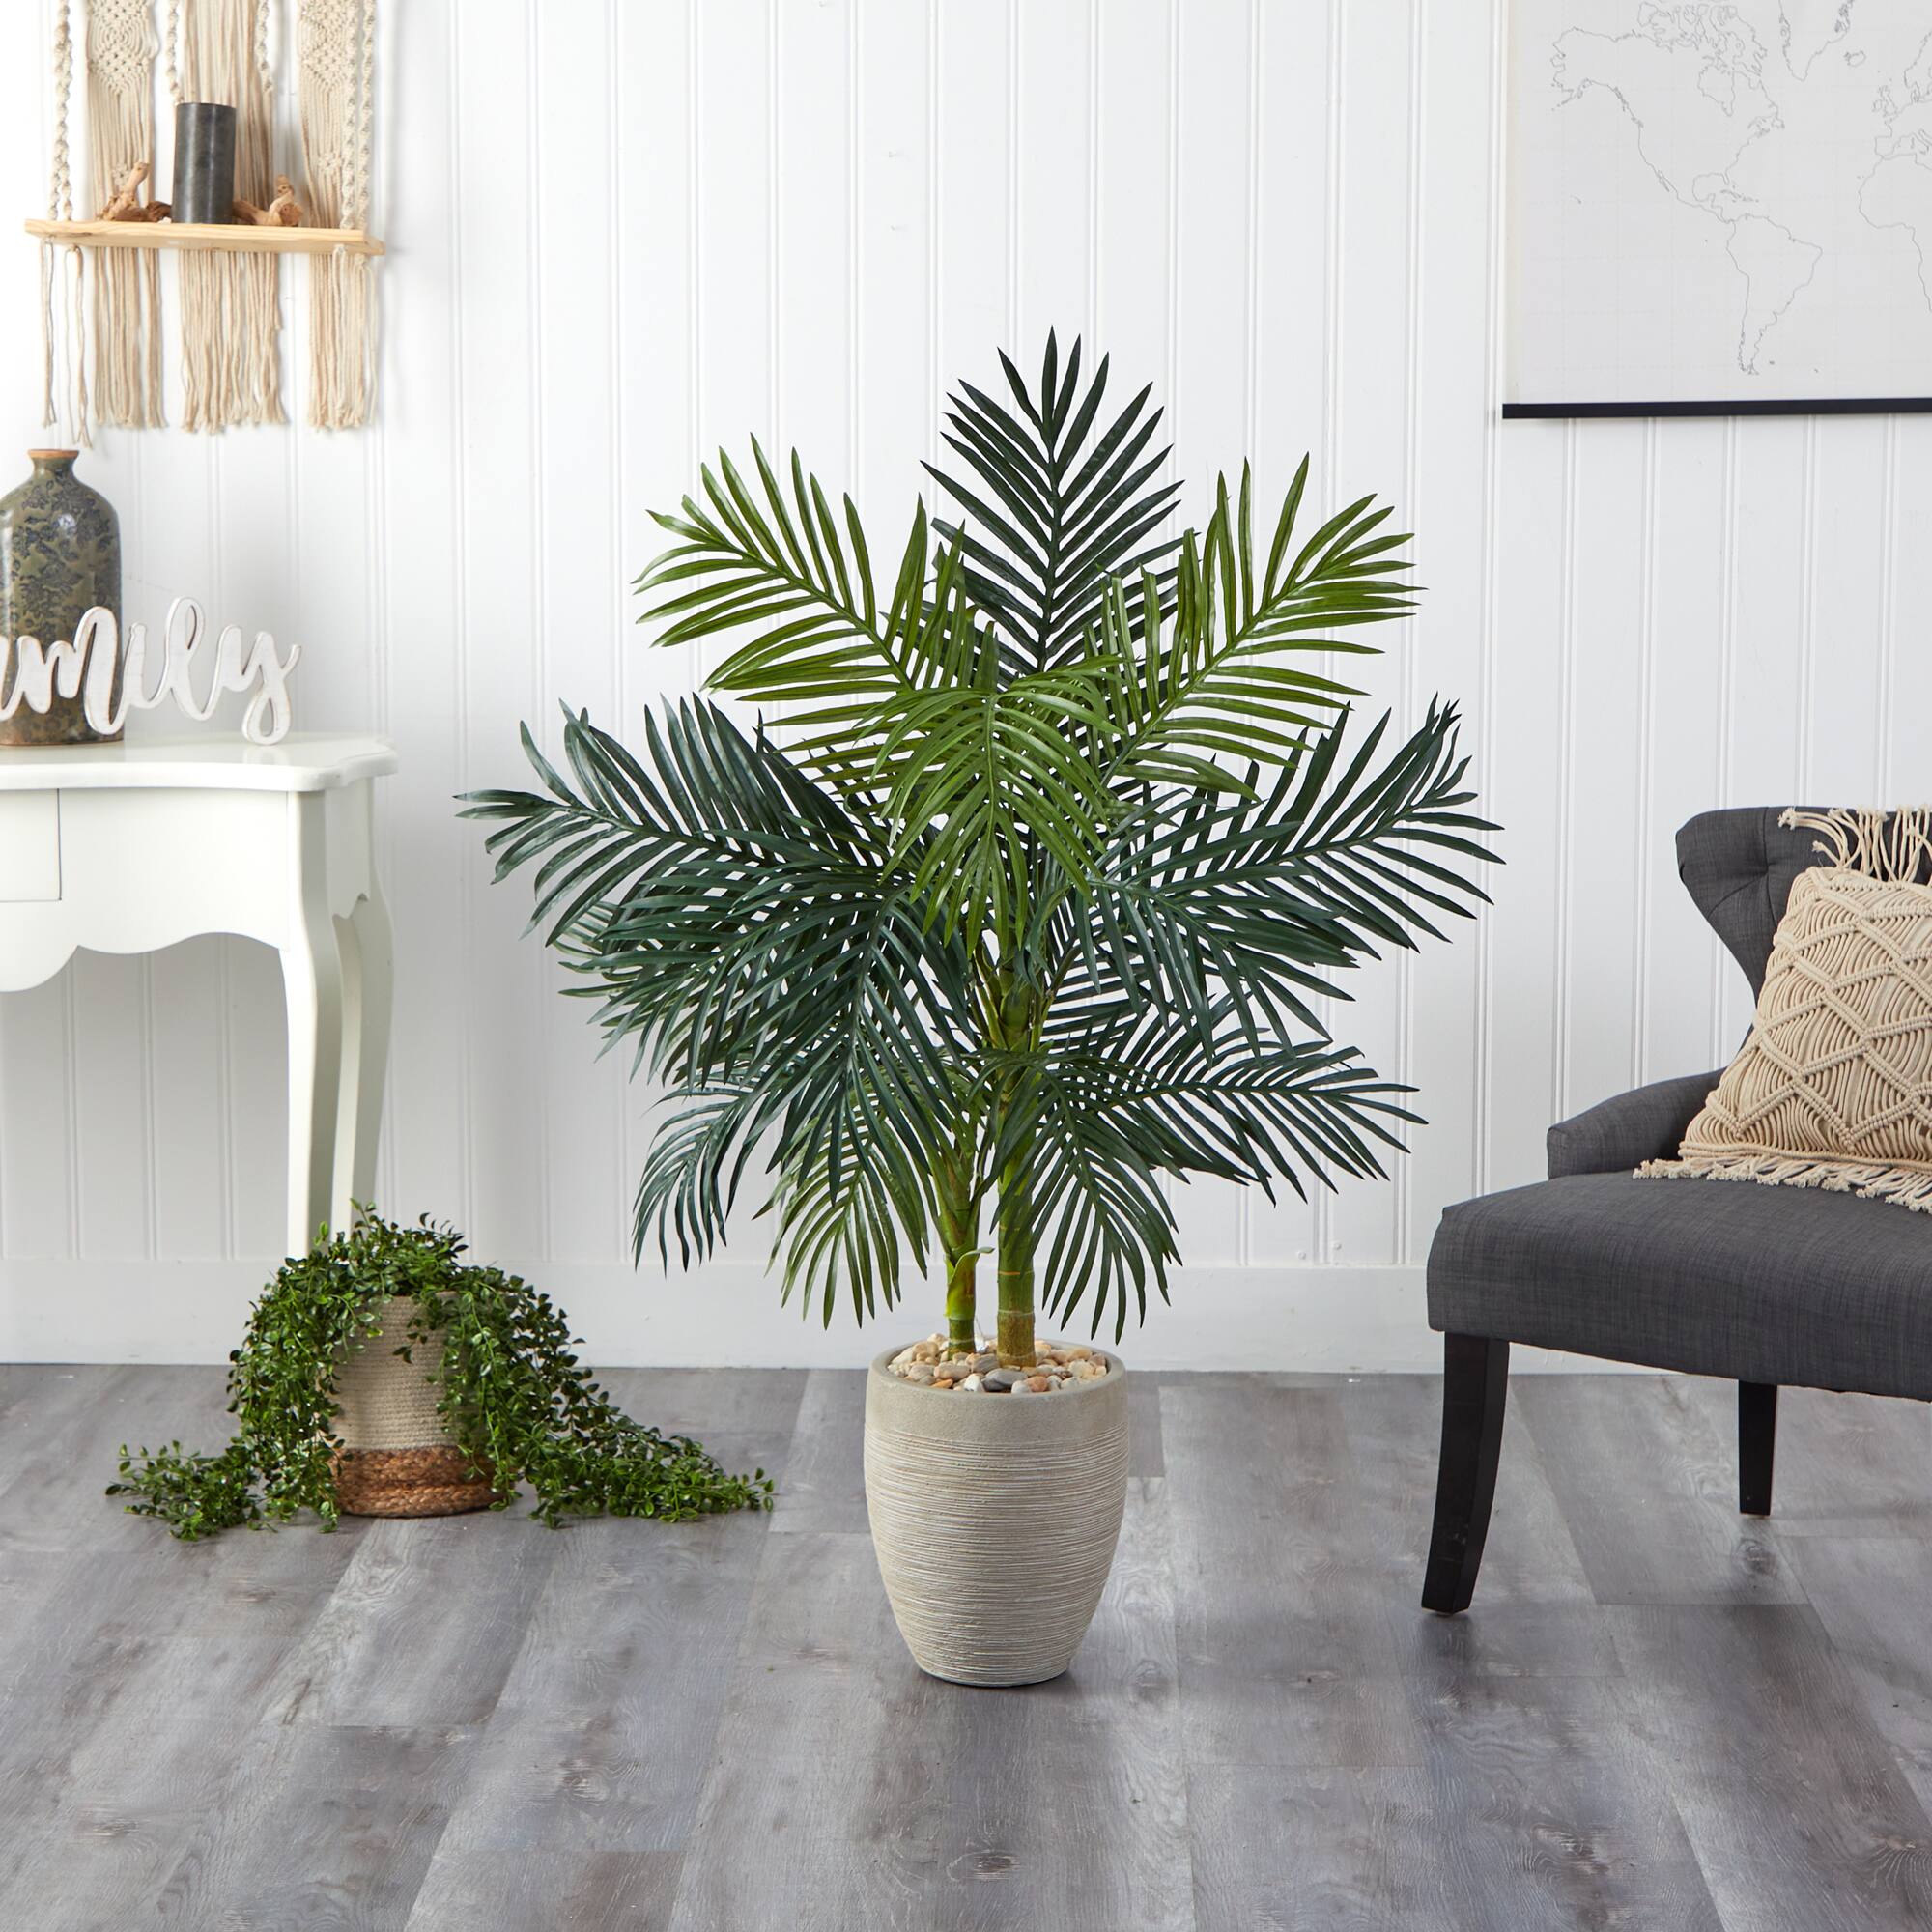 4.5ft. Golden Cane Palm Tree in Oval Planter